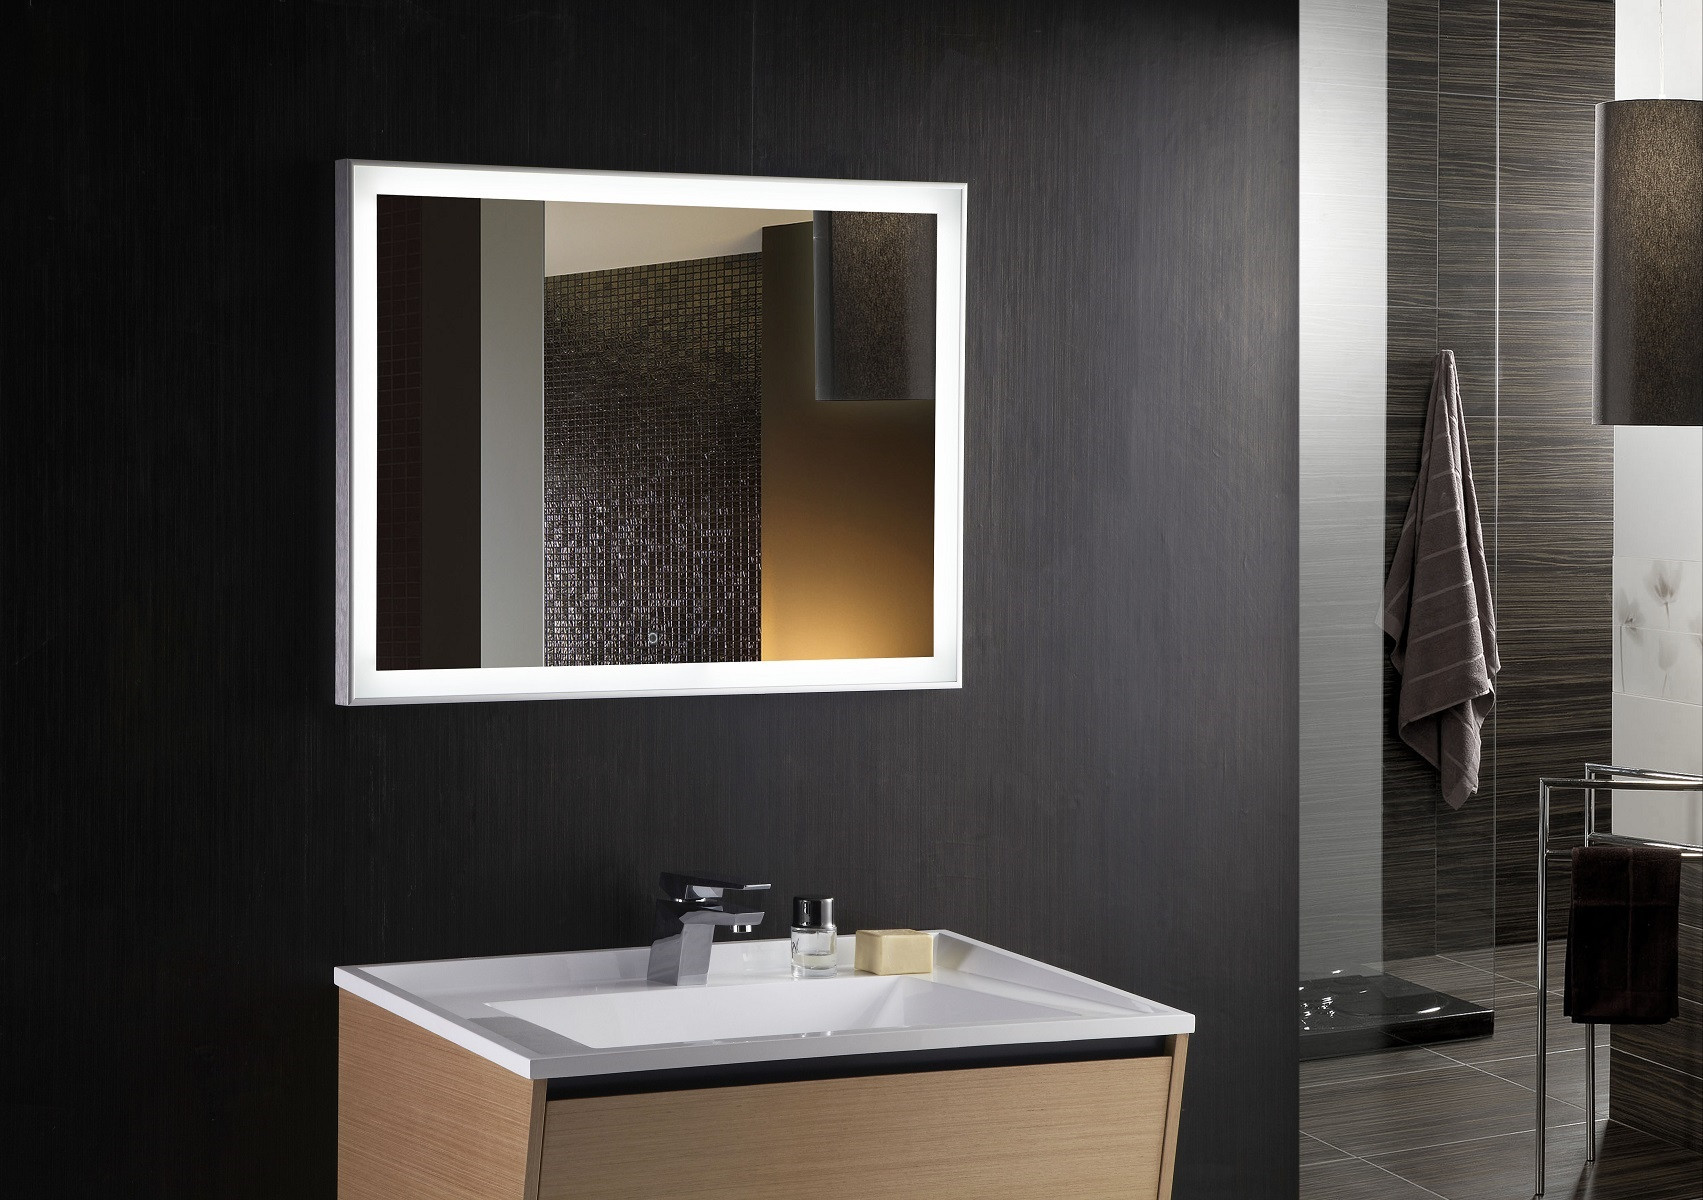 Bedroom Mirror With Lights
 Bedroom Make Your Home More Beautiful With Lighted Vanity